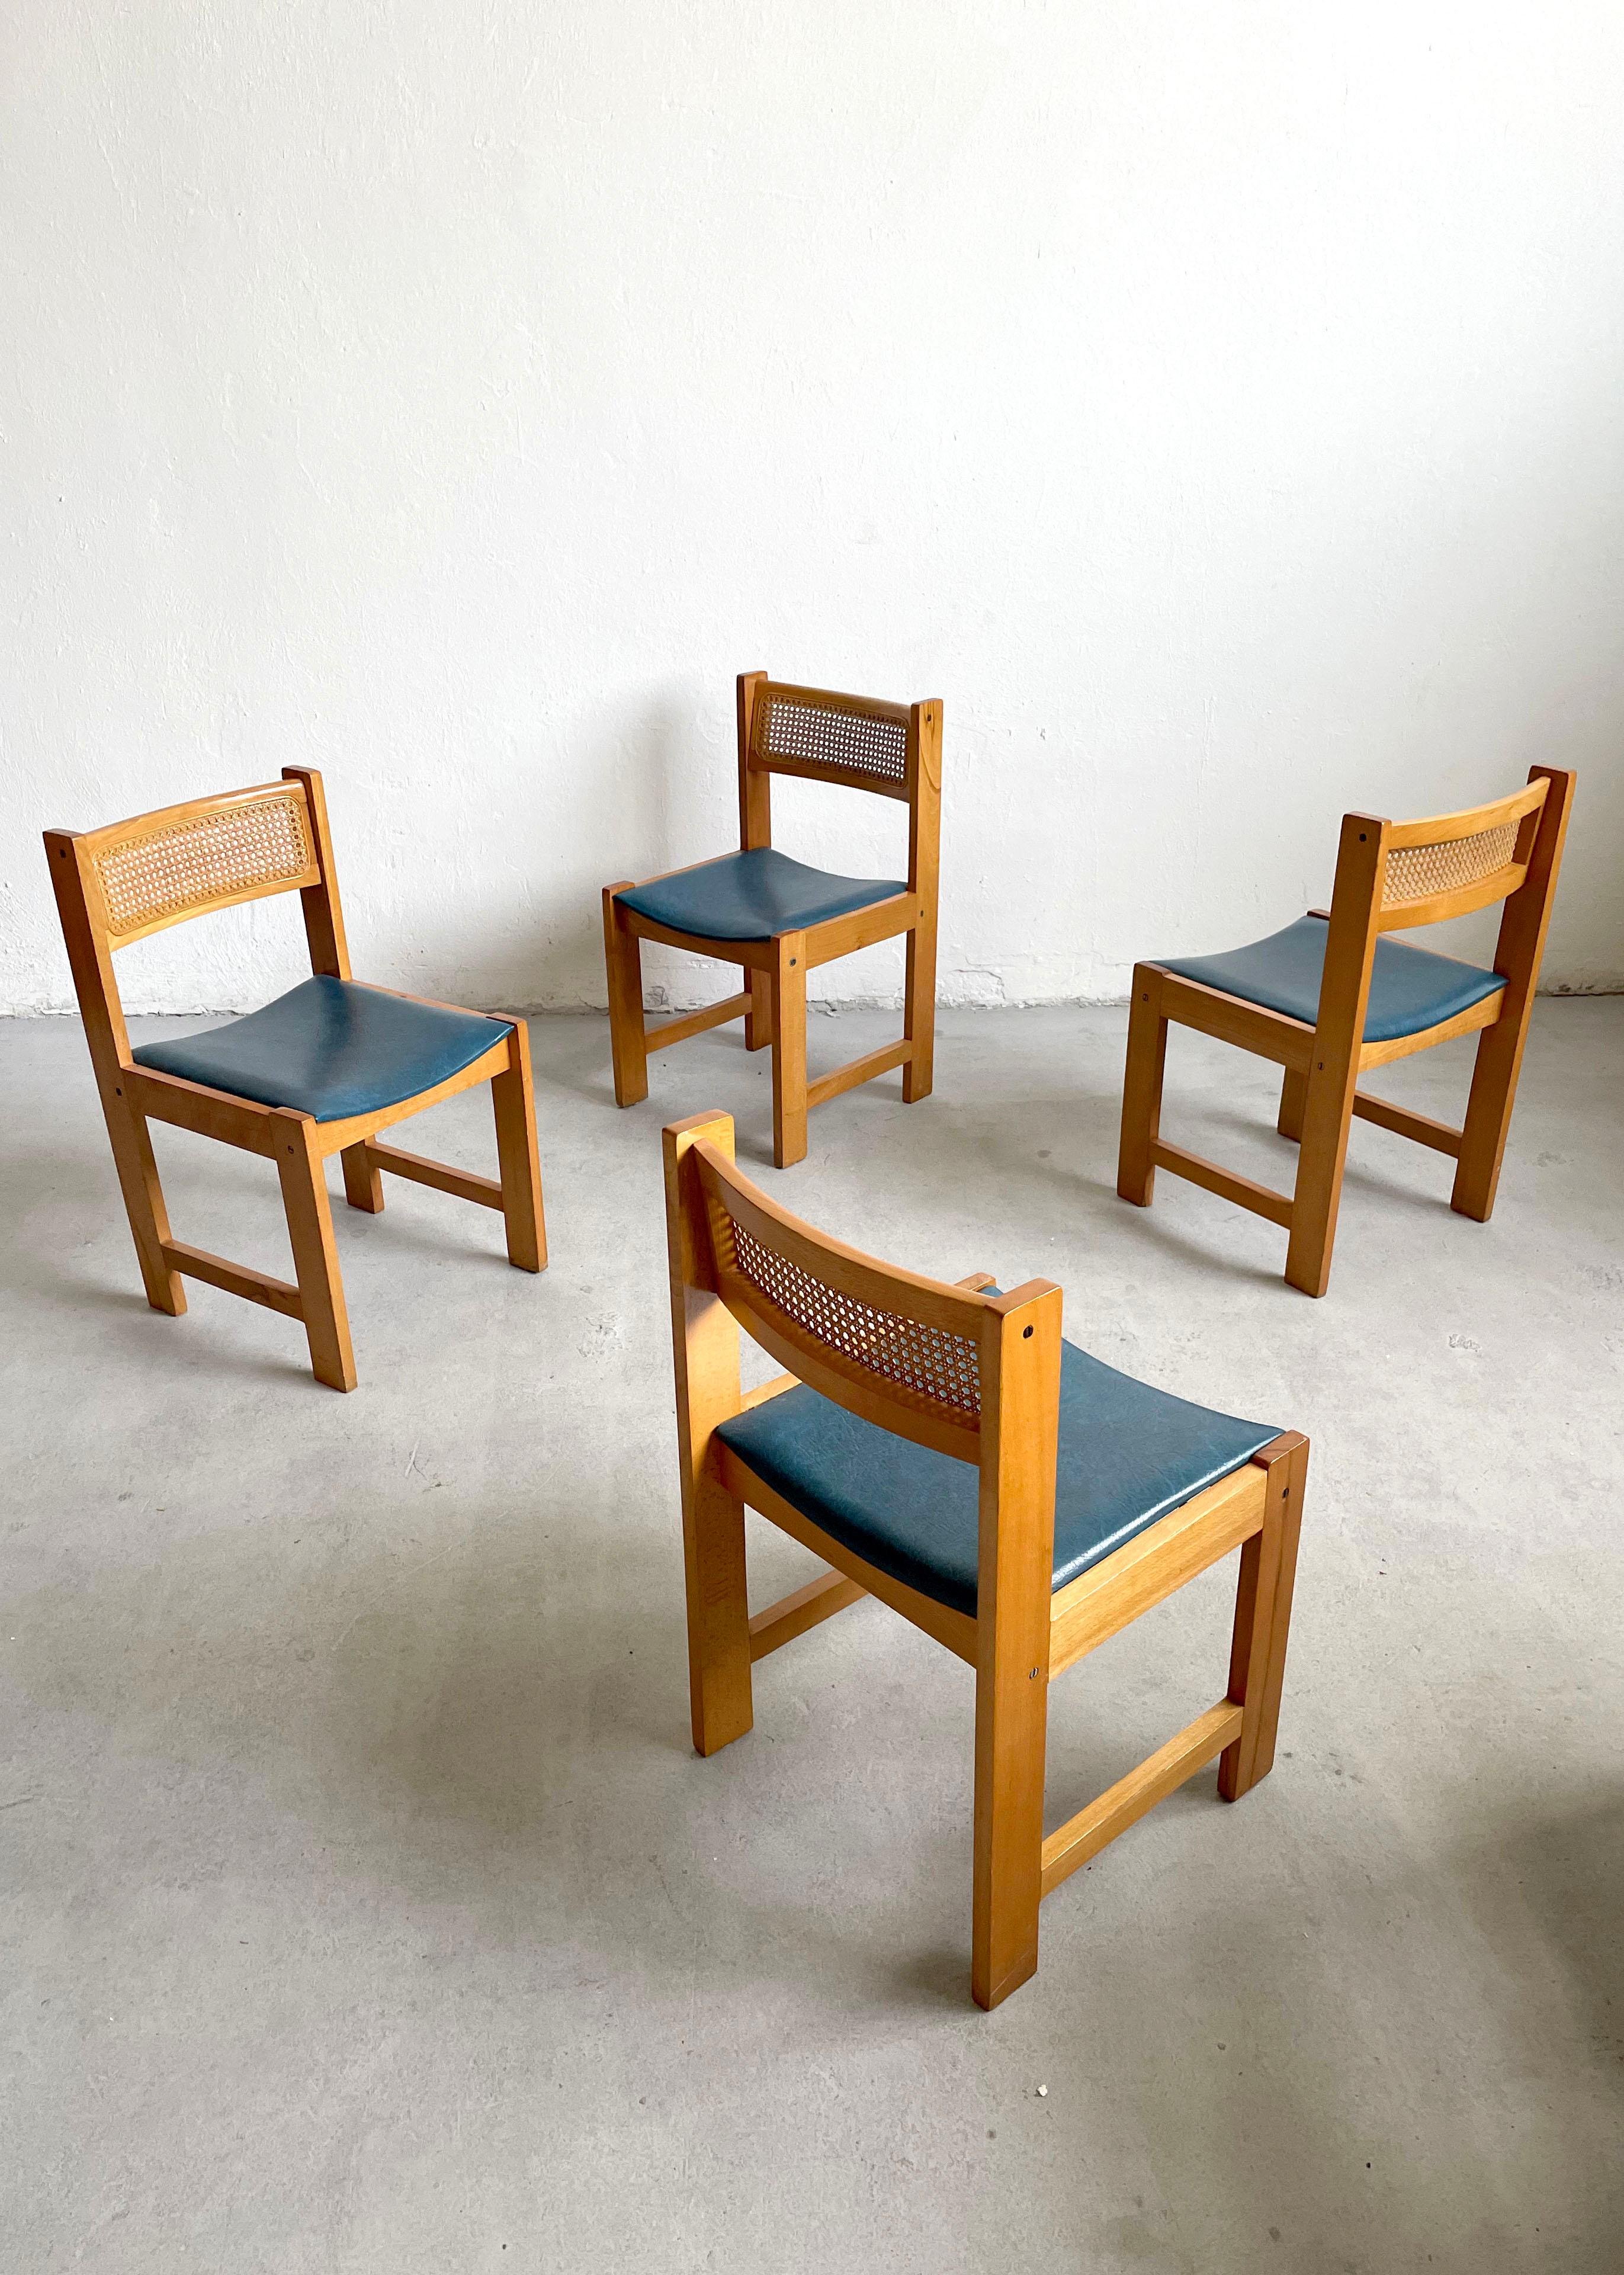 European Set of 4 Mid-Century Cane Rattan and Vinyl Wooden Dining Chairs, 1960s 1970s For Sale